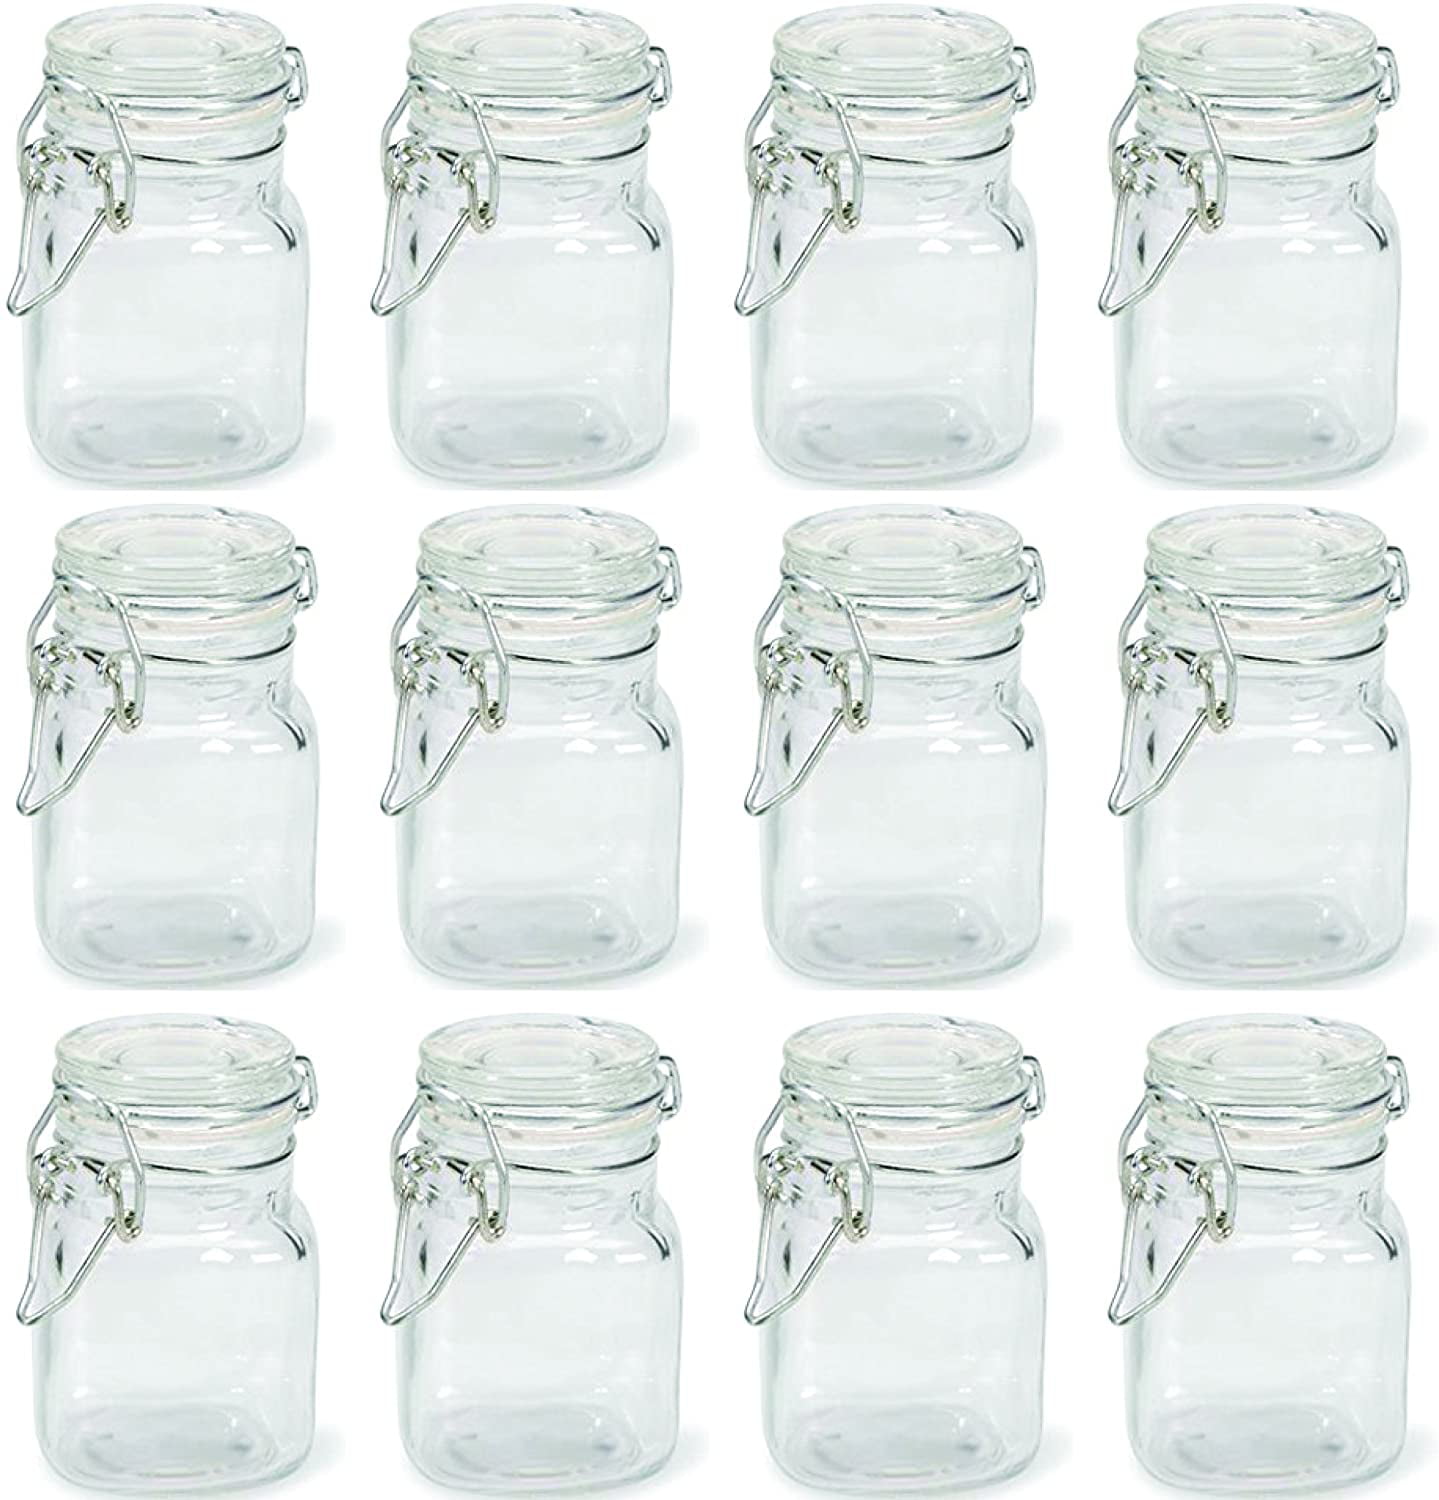 Stock Your Home 3 Oz Airtight Glass Jar with Leak Proof Rubber Gasket and Hinged 